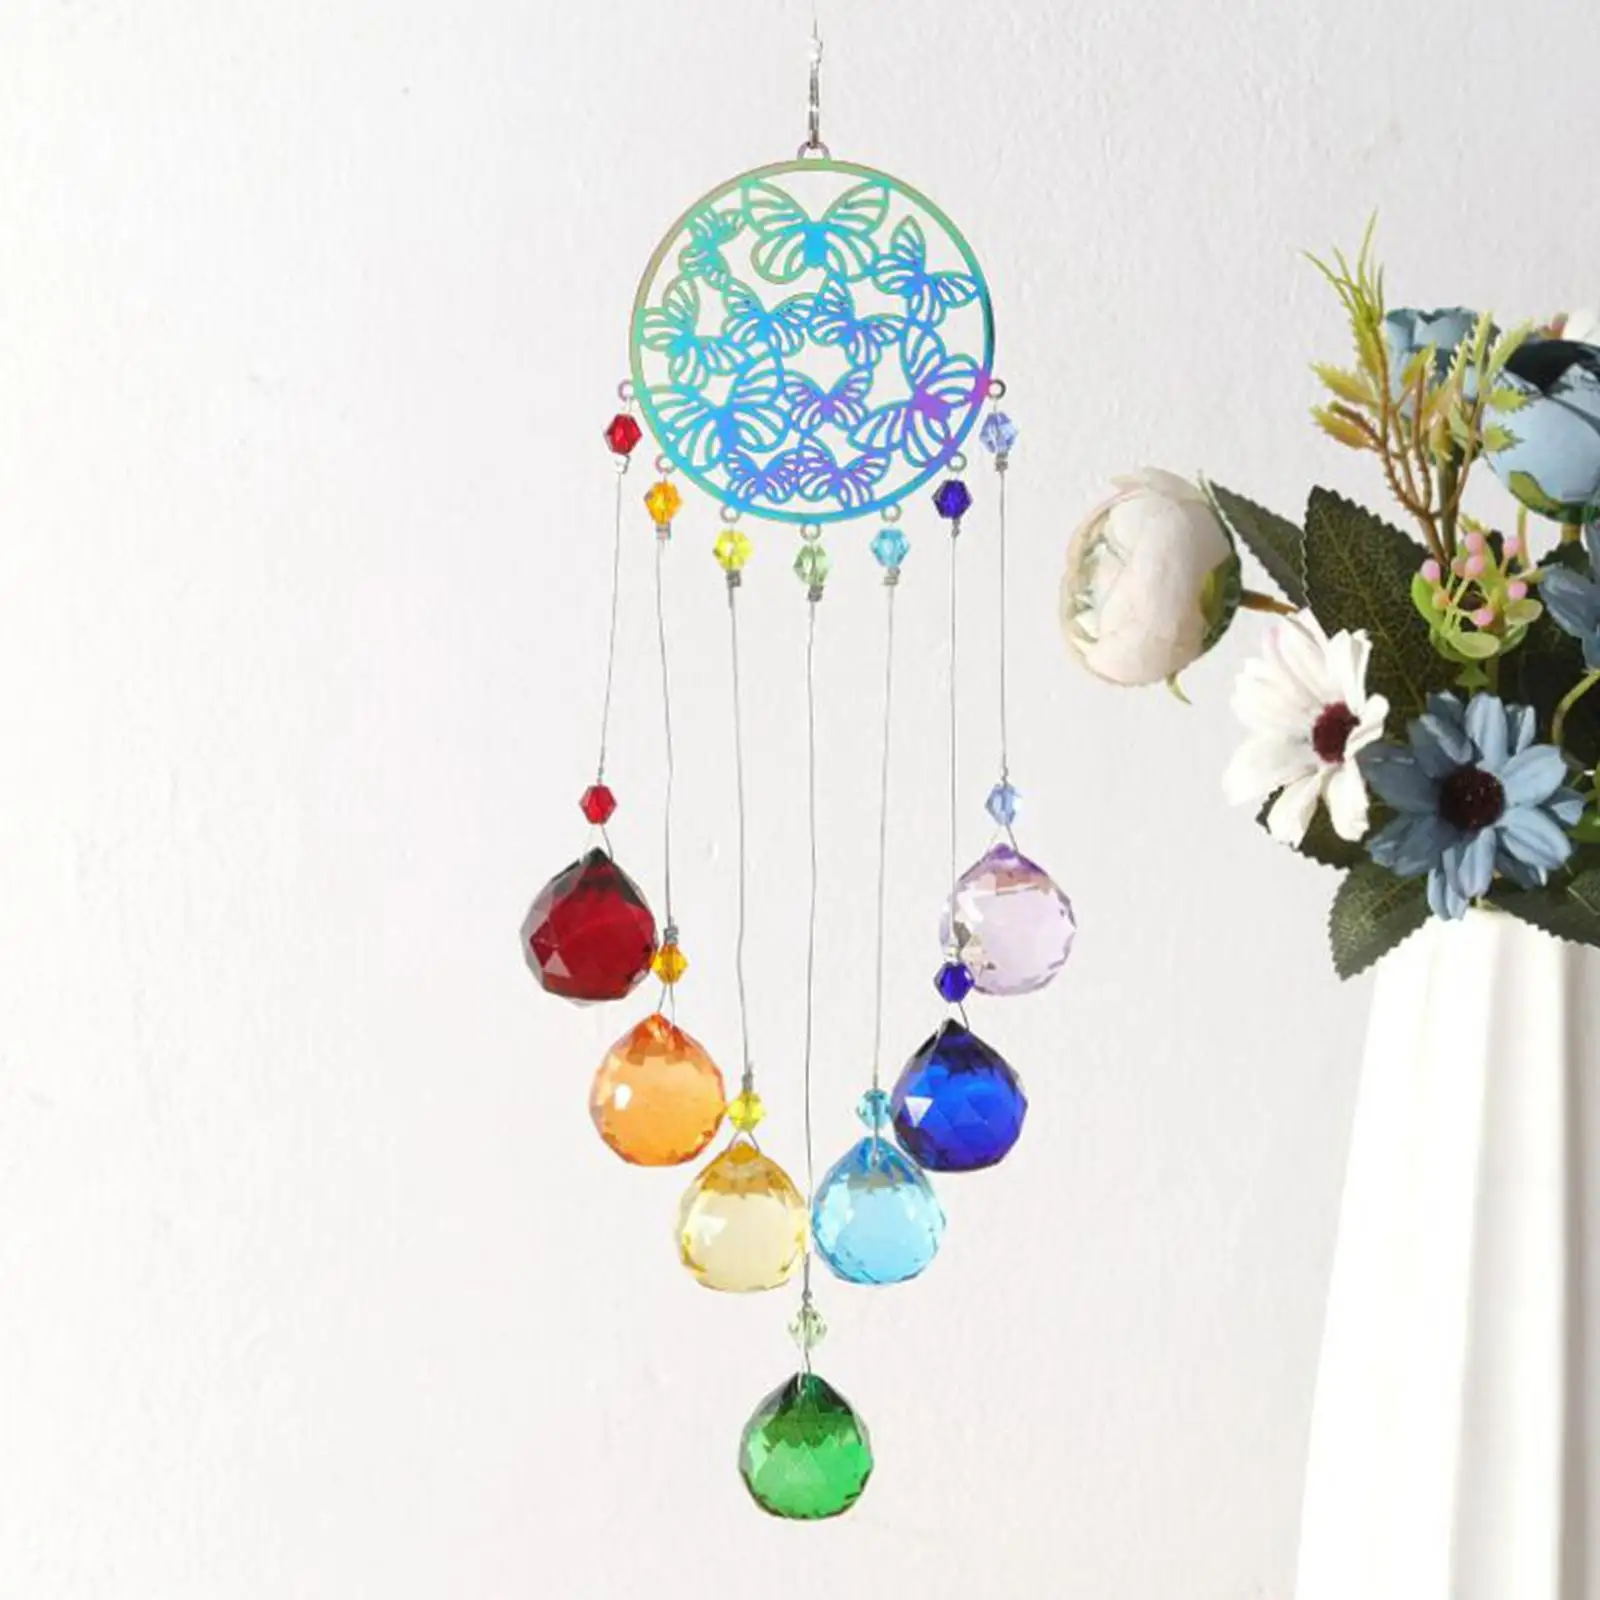 Hanging Crystal Wind Chime Prism Rainbow Colorful Pendant Wind Bell for Party Wedding Patio Indoor Outdoor Home Decor